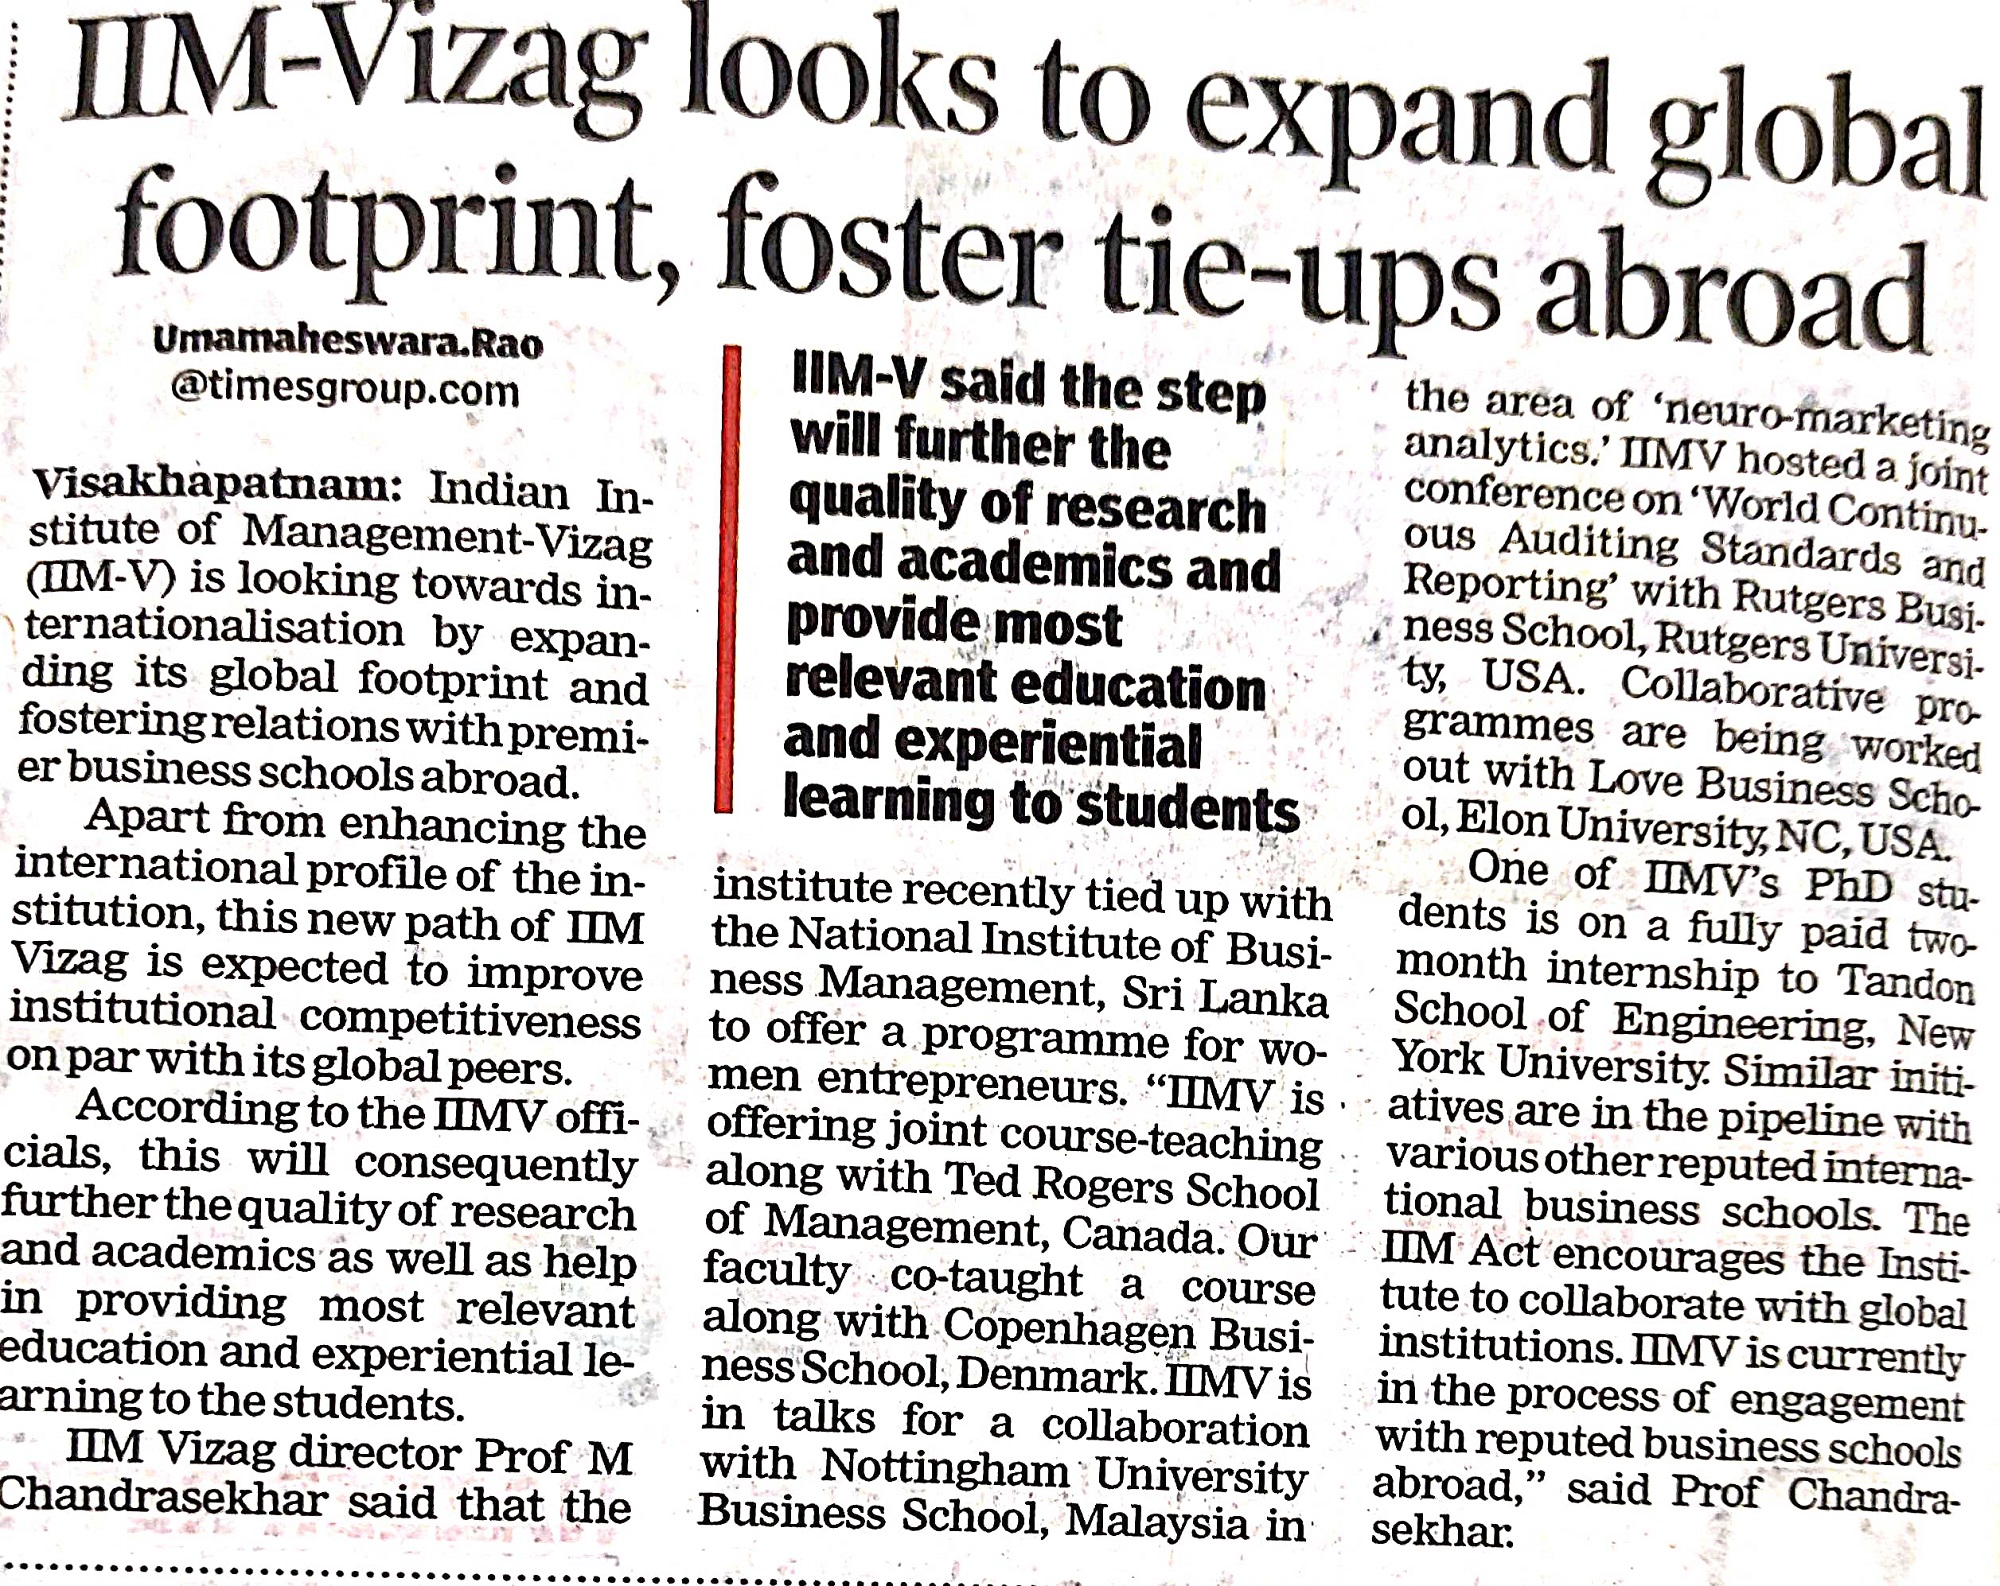 IIM-Vizag looks to expand global footprint foster tie-ups abroad - 13.02.2023